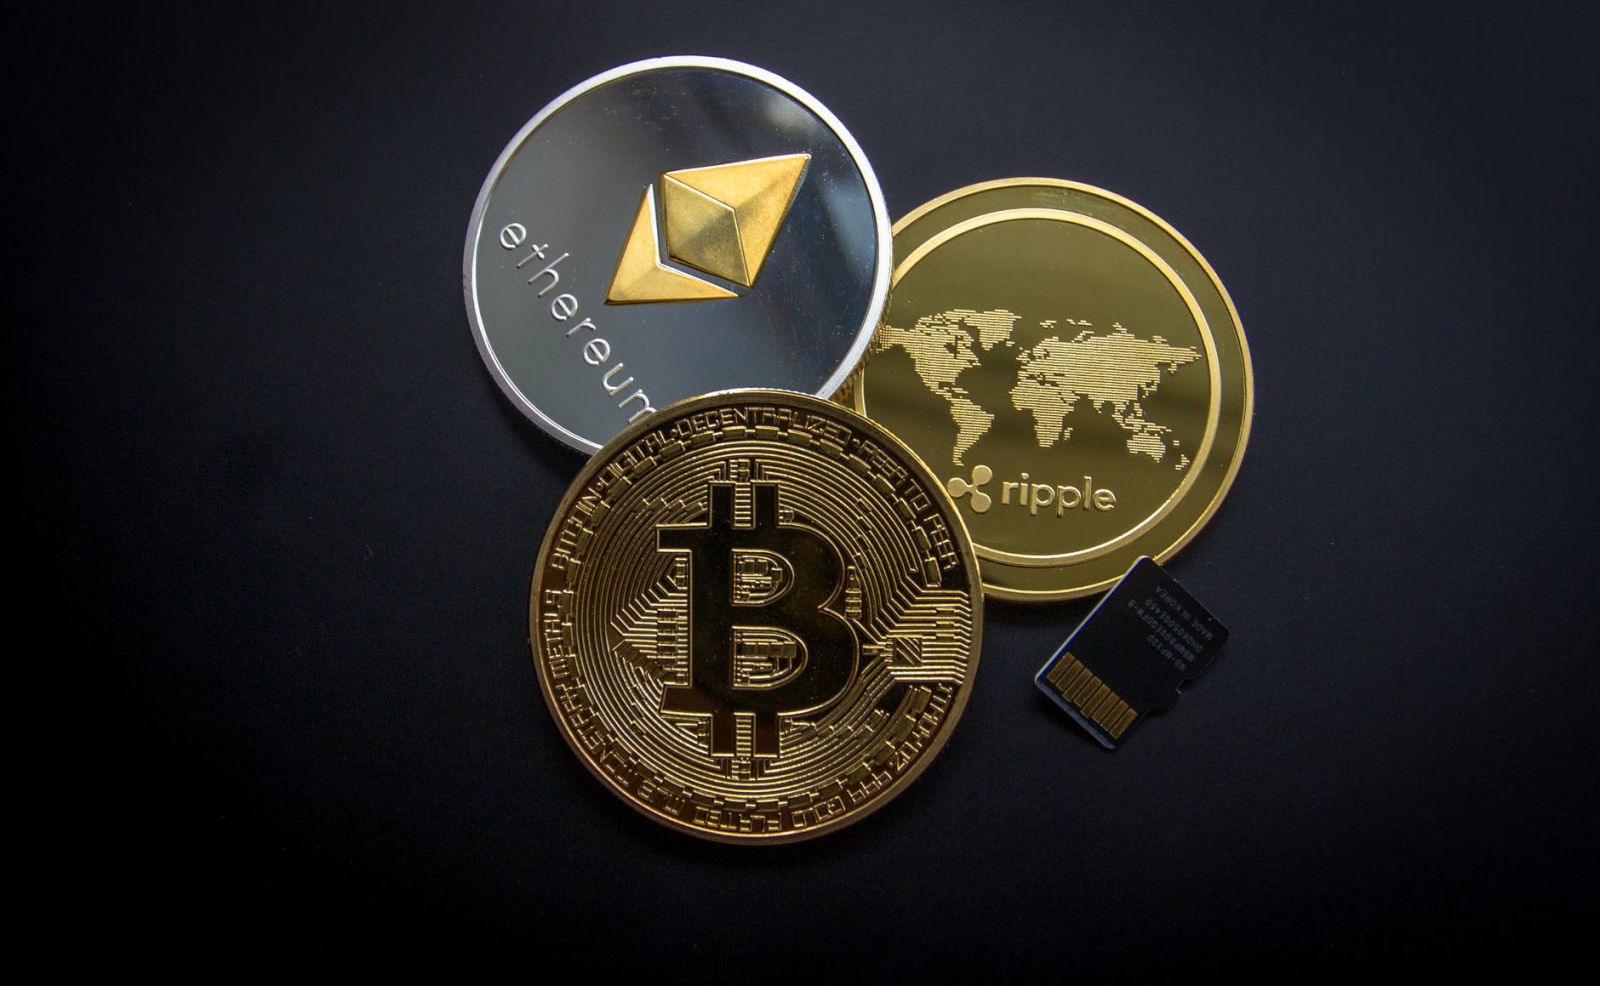 A photo of 3 types of cryptocurrency including Ripple, Ethereum and Bitcoin